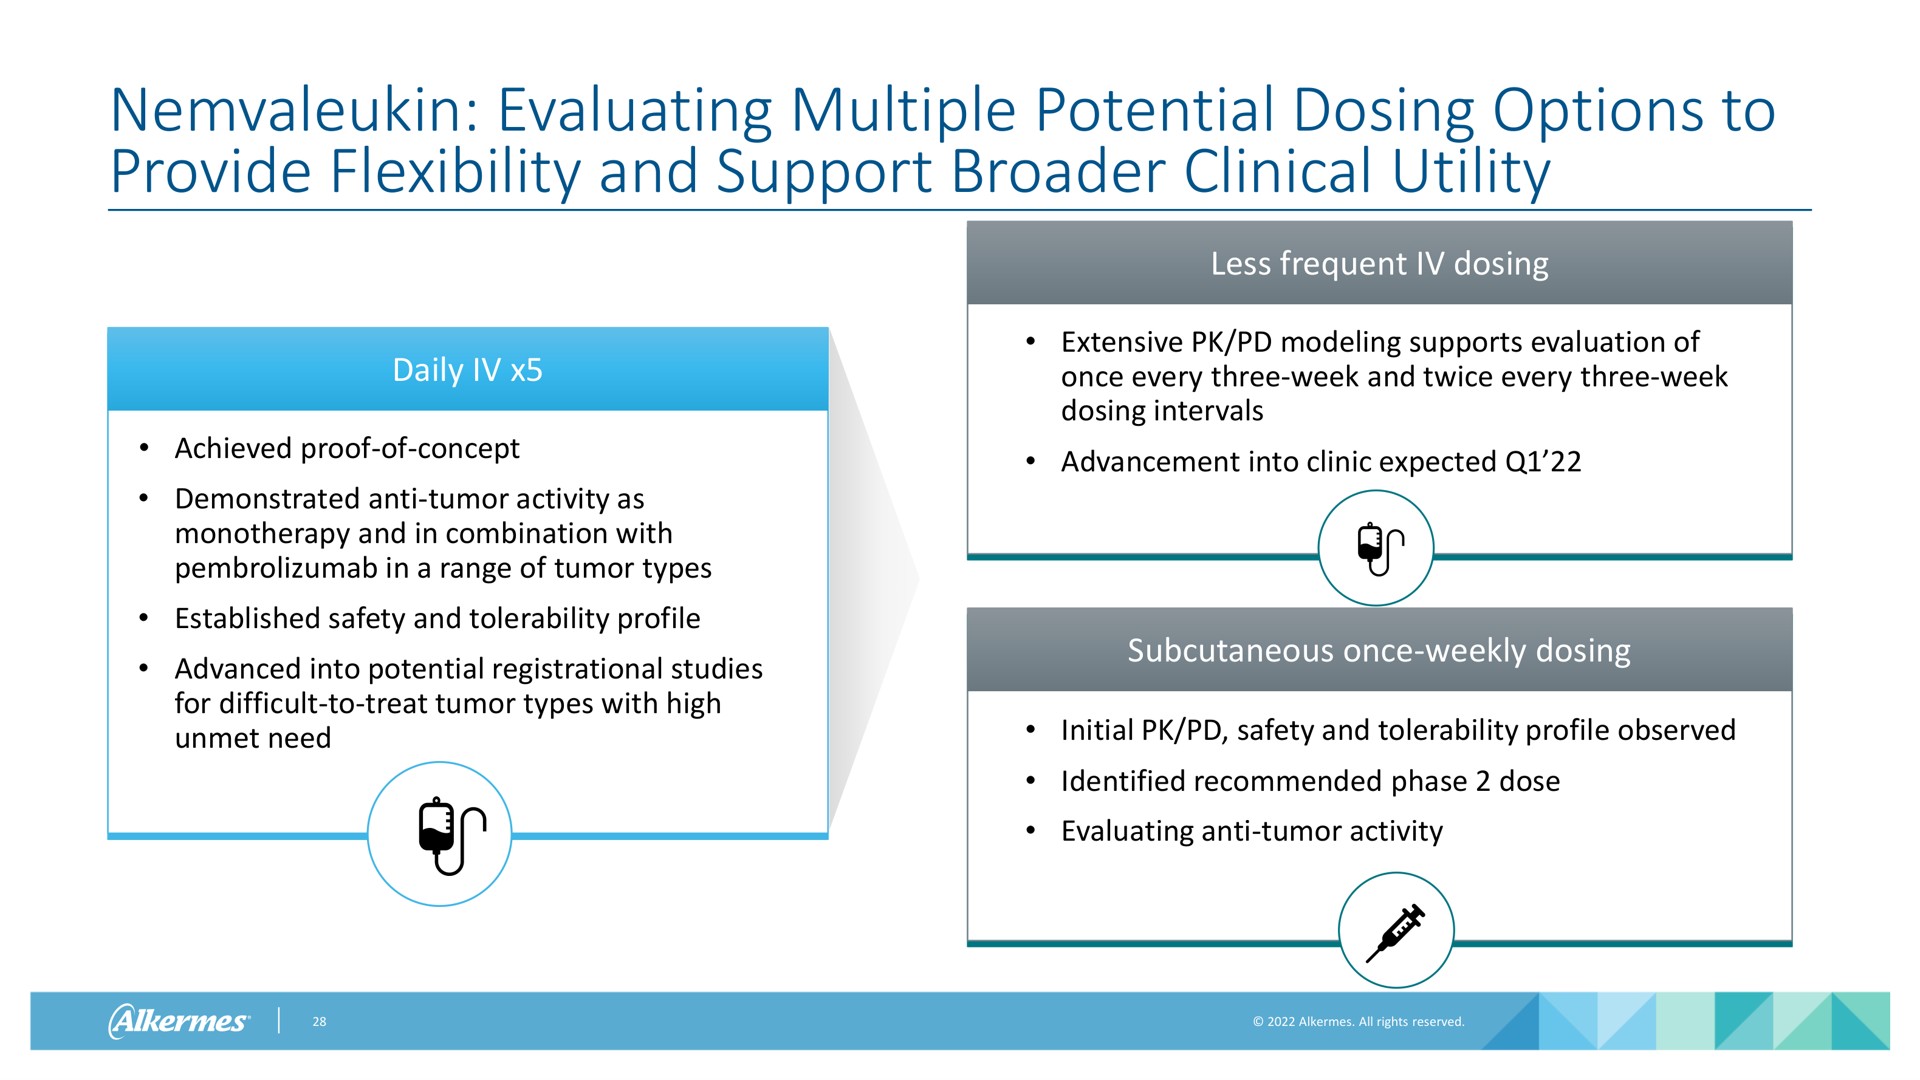 evaluating multiple potential dosing options to provide flexibility and support clinical utility | Alkermes